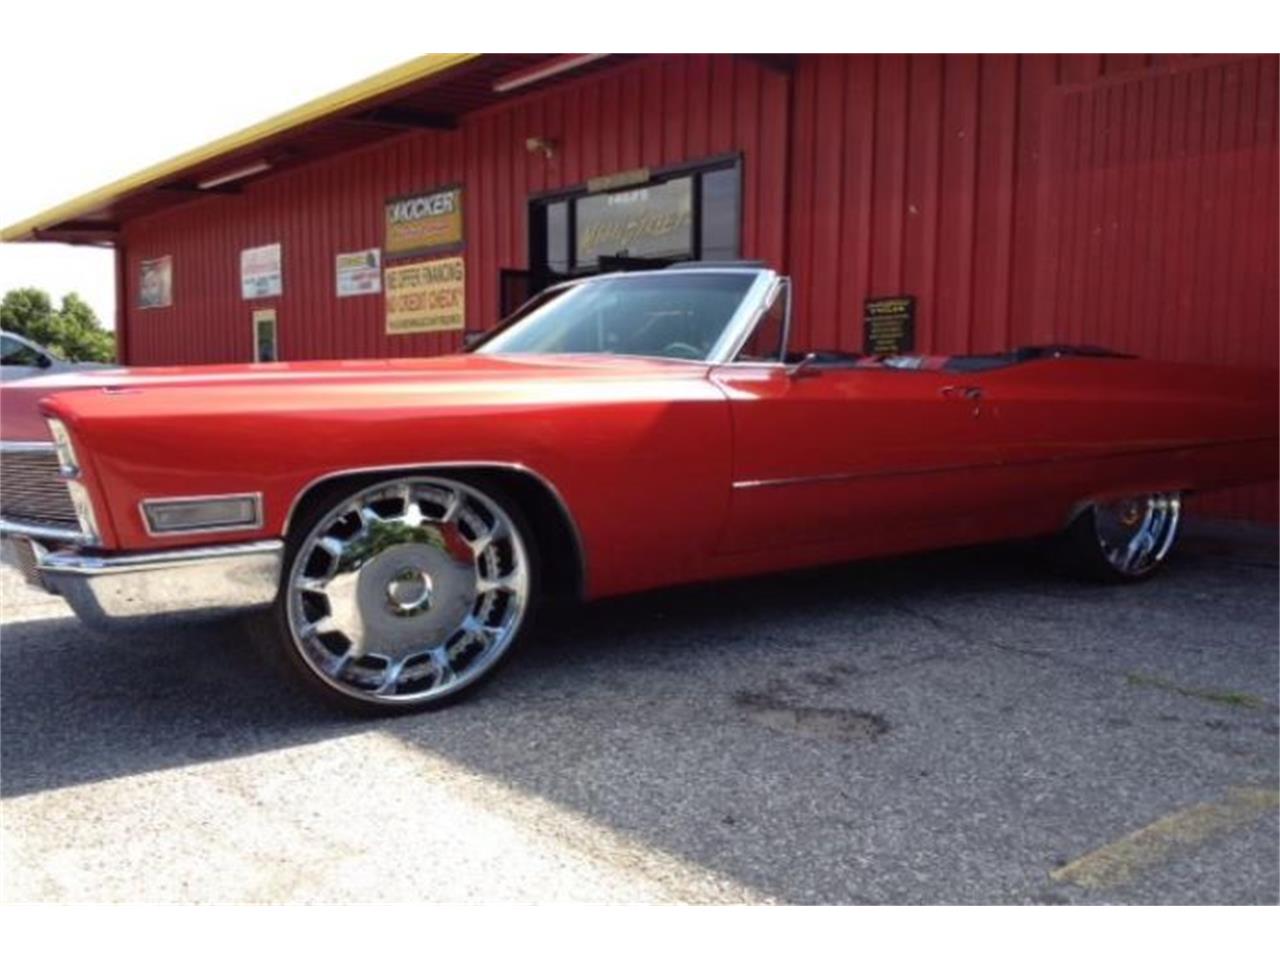 cadillac deville on 24 inch rims